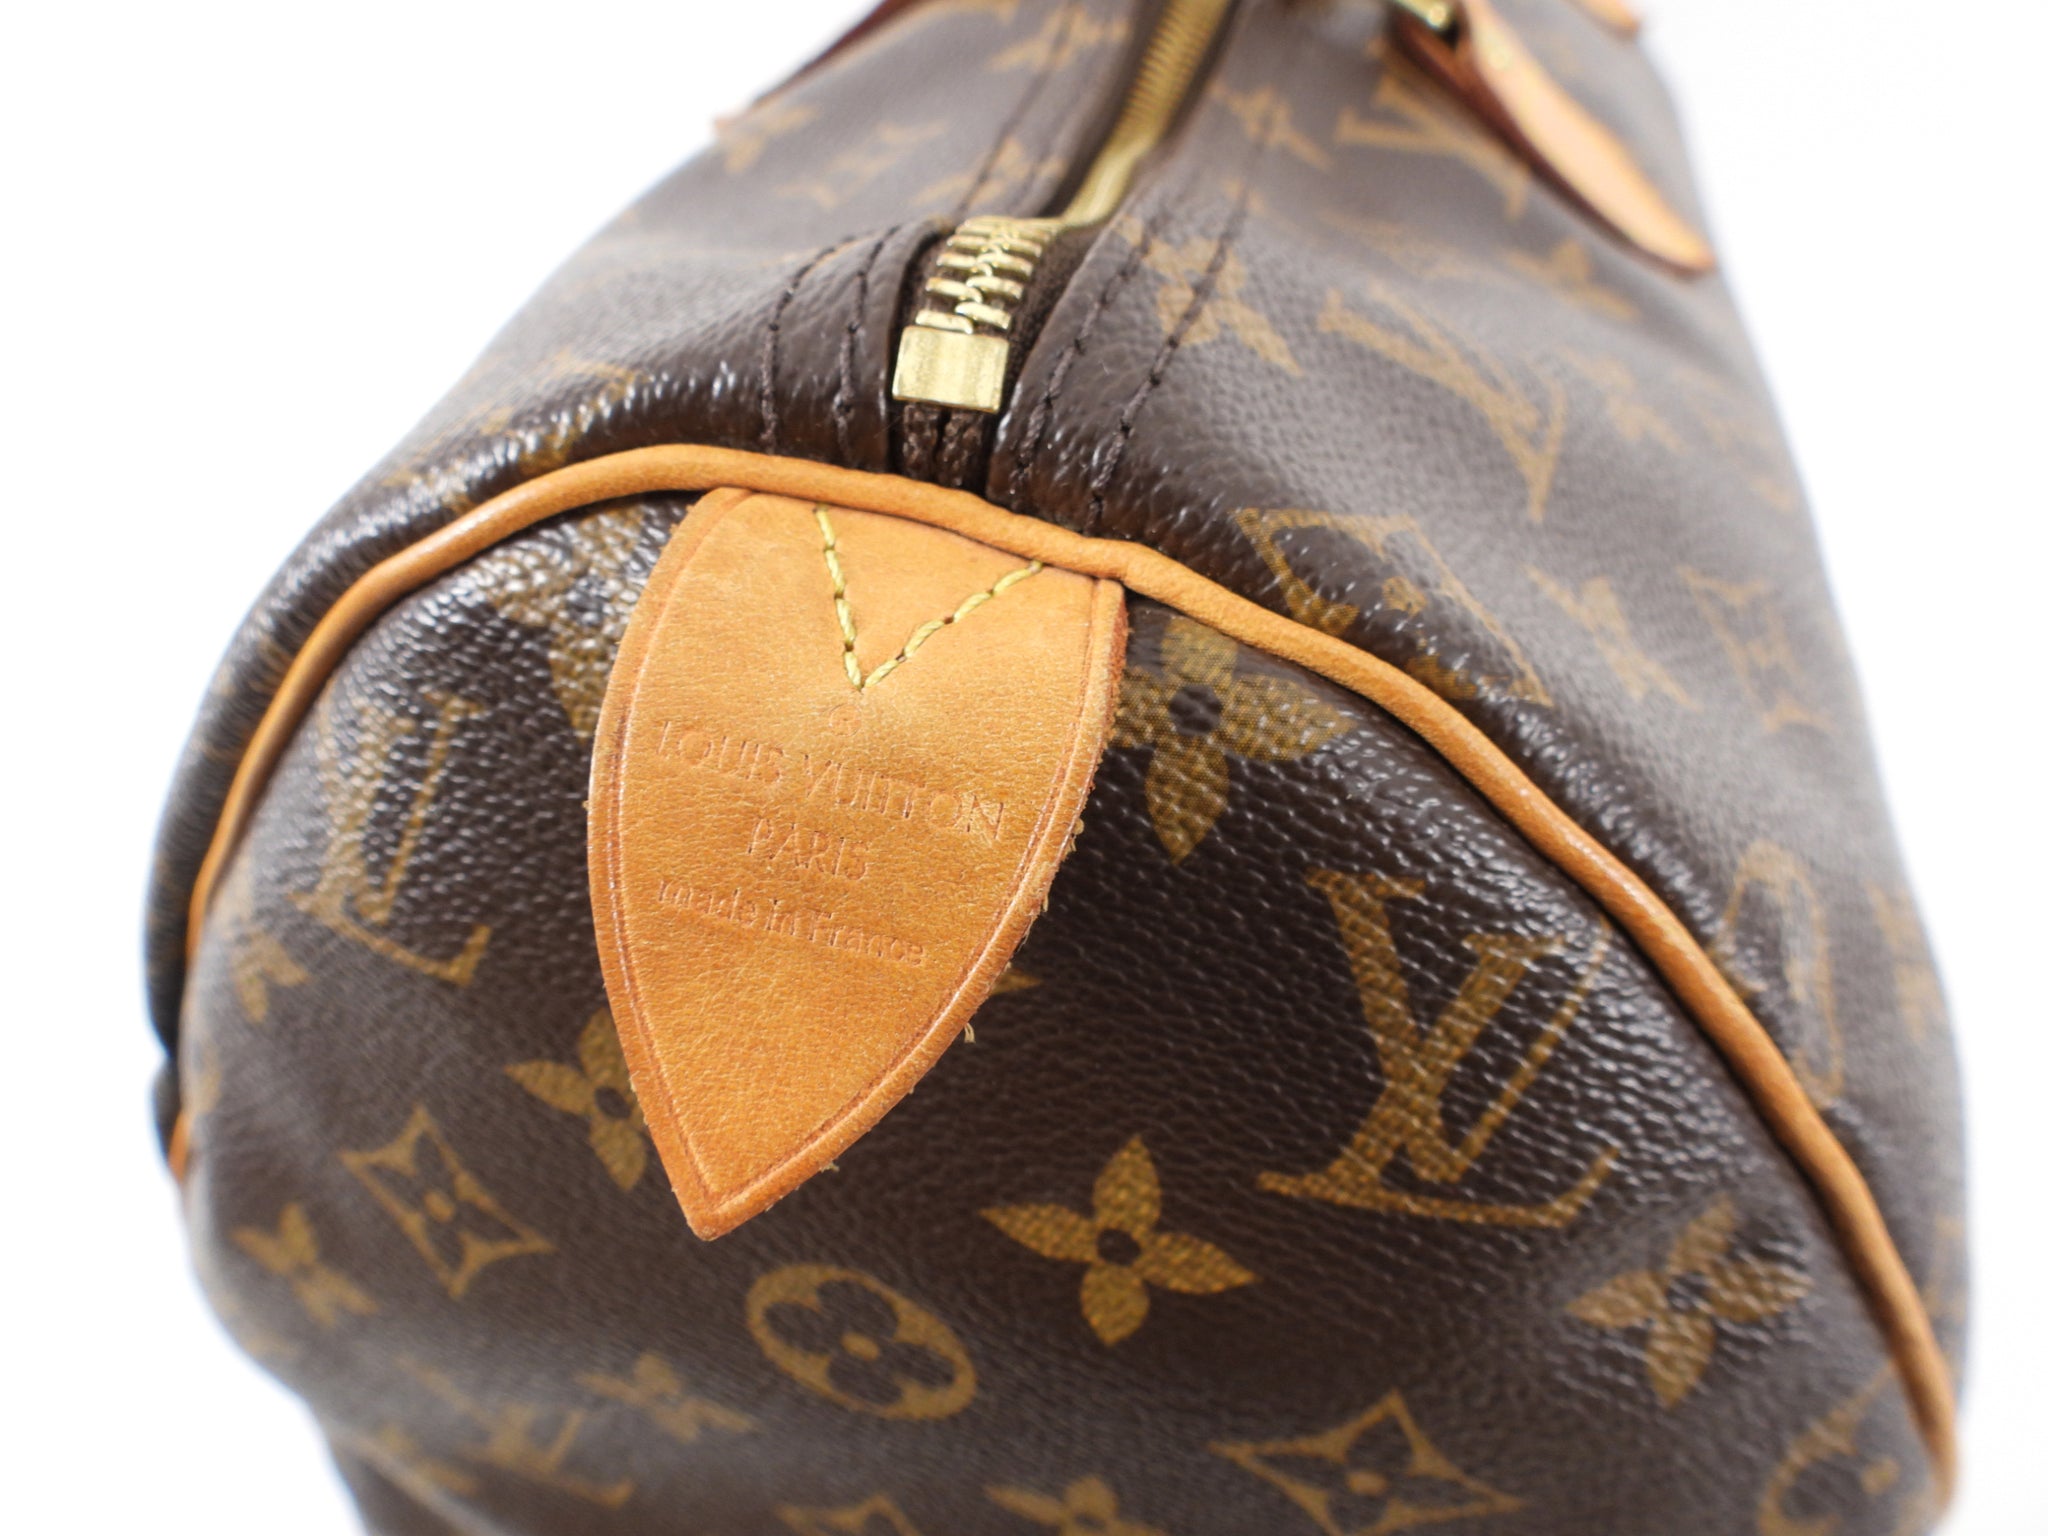 Fantastic Genuine LOUIS VUITTON Keepall / Duffle Bag - THIS IS HOW EVERYONE  WANTS THEM Great Wear / Patina #1590509